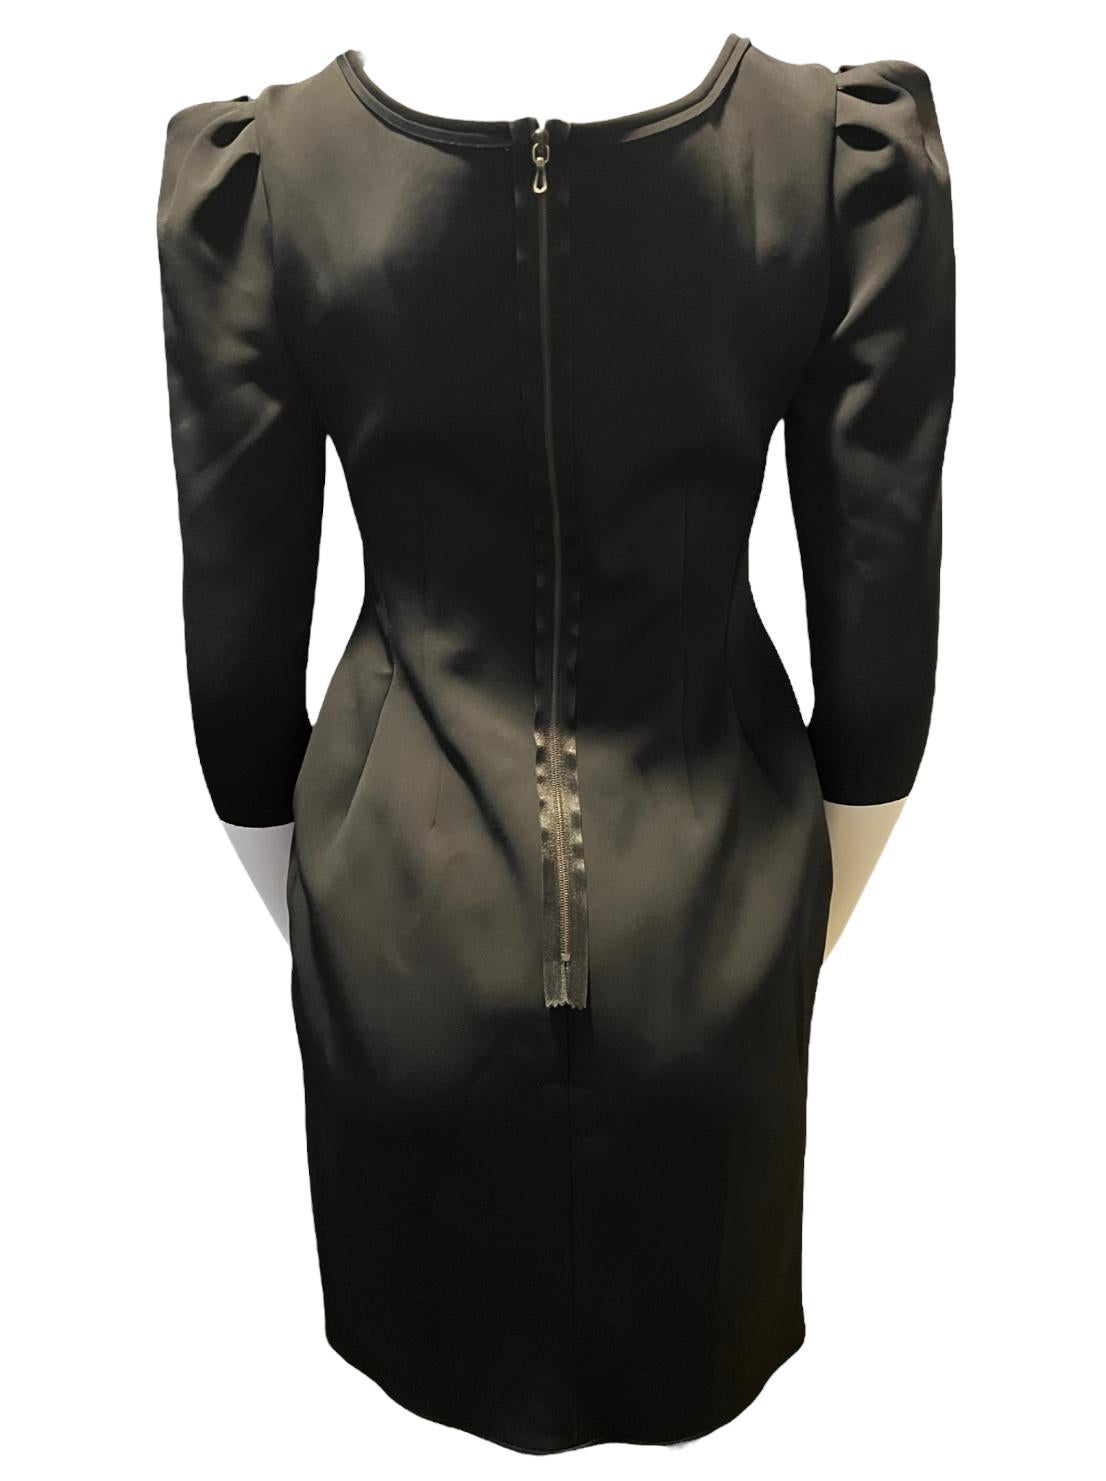 Lanvin Black Mini Dress, Size 40 In Excellent Condition For Sale In Beverly Hills, CA